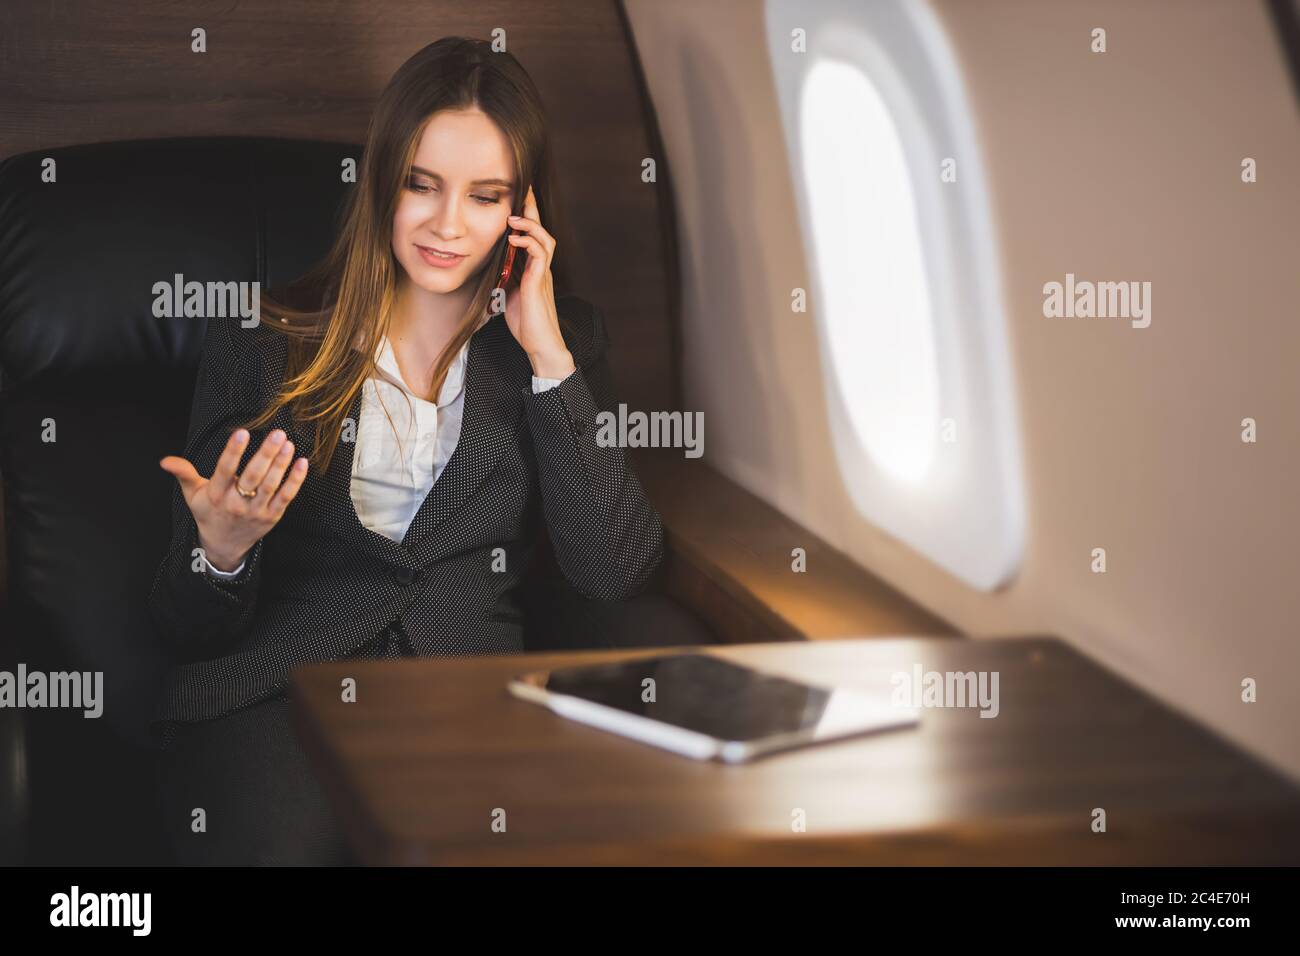 Cheerful happy brown haired business lady in white blouse and formal suit, sitting in comfortable seat, laughing talking on mobile phone during flight Stock Photo